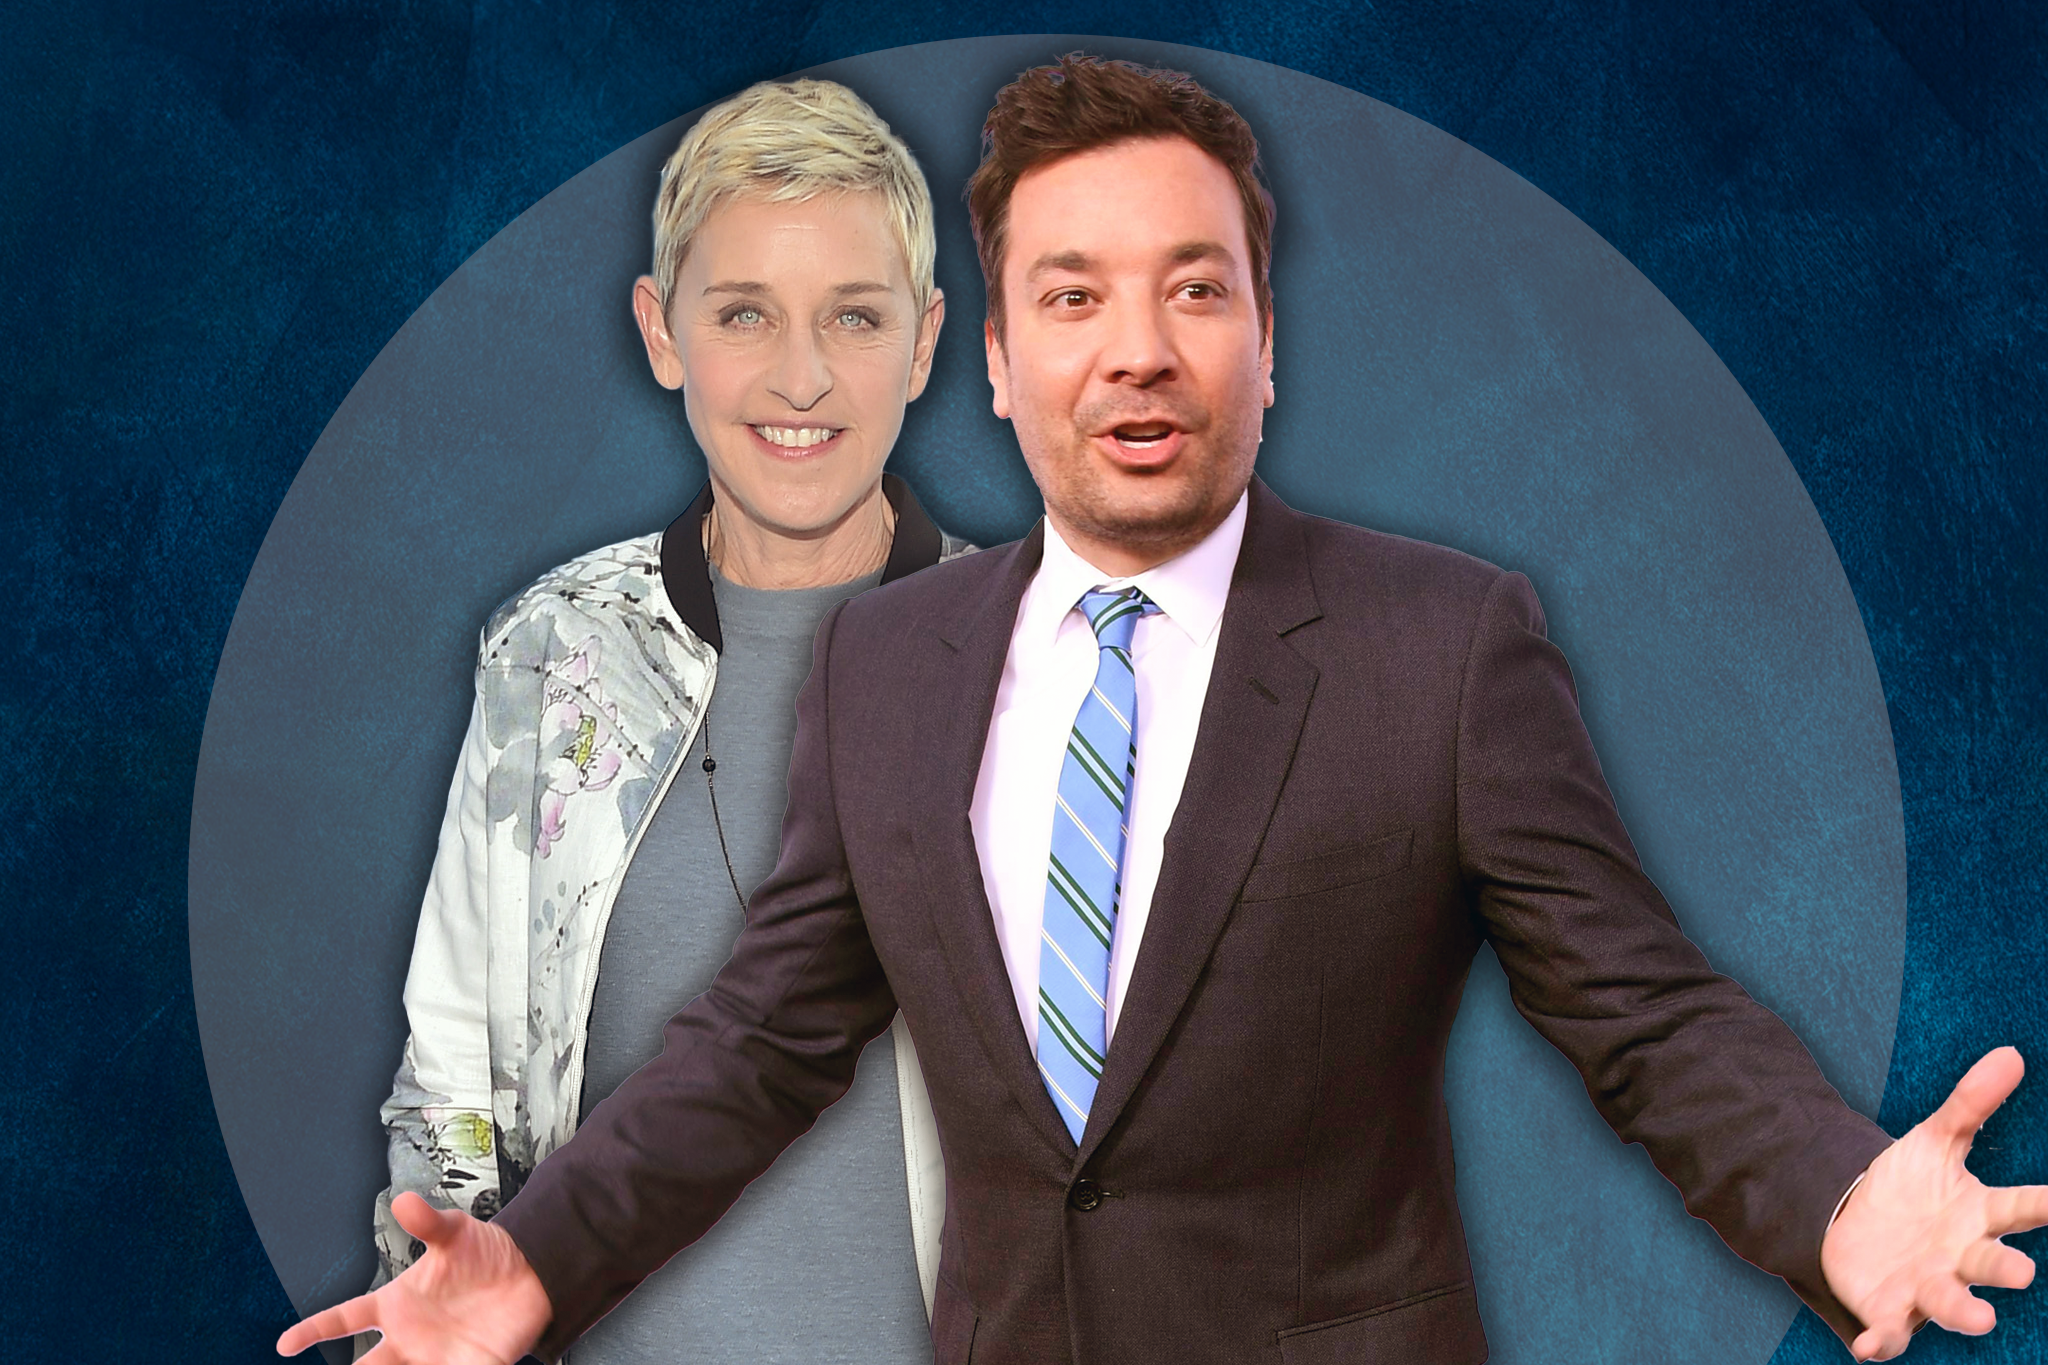 Employees at shows hosted by Ellen DeGeneres and Jimmy Fallon have made complaints